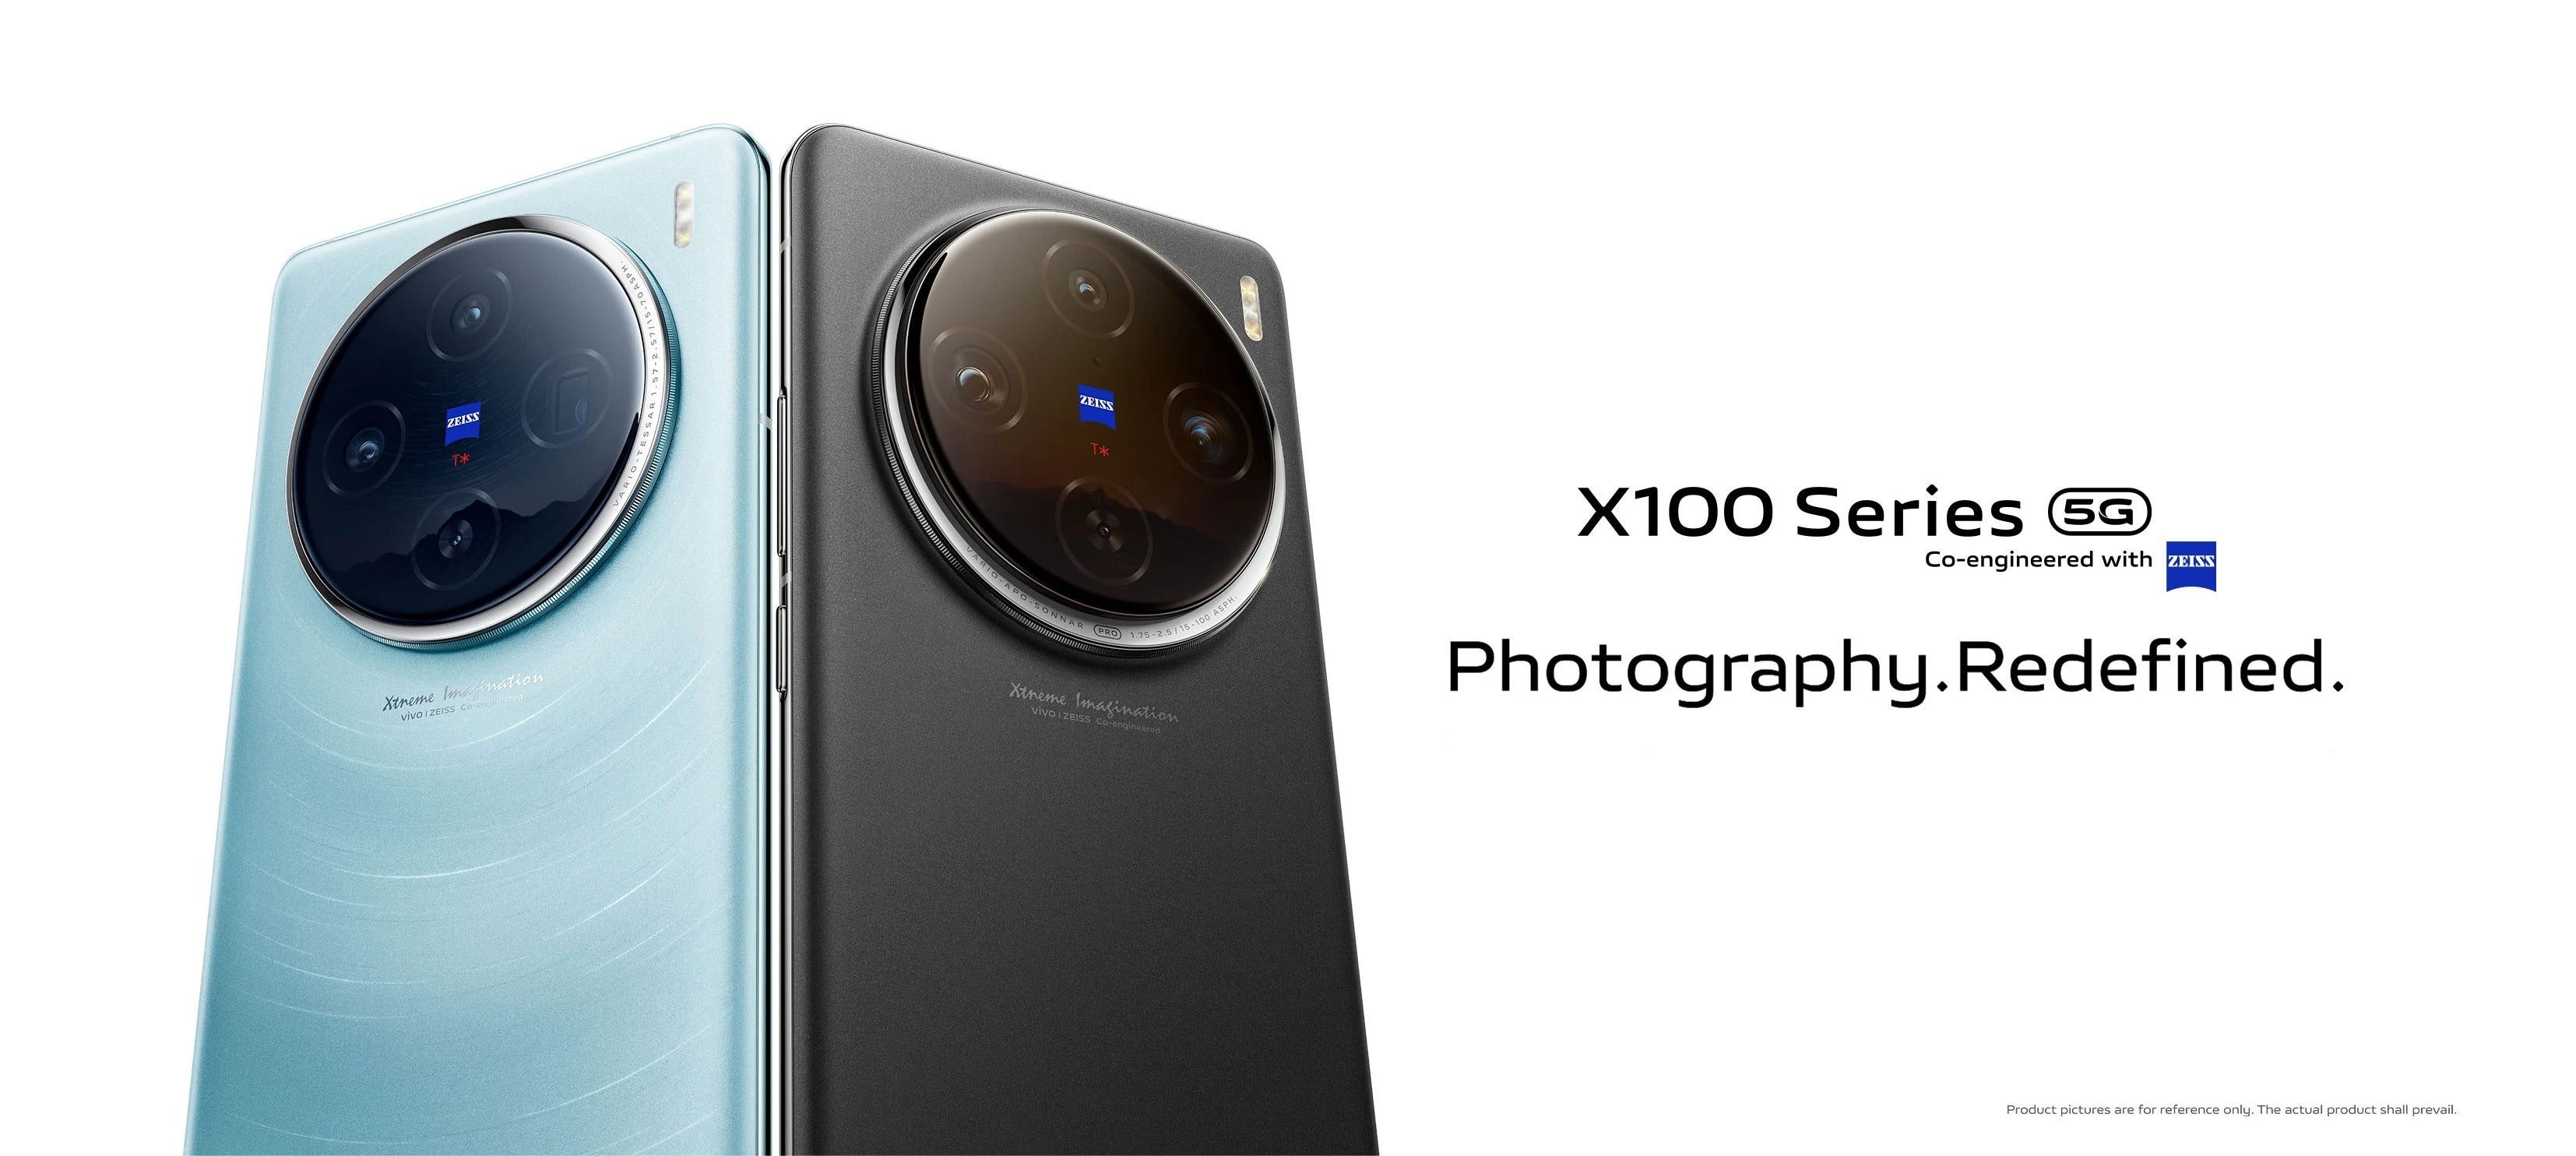 vivo X100 series camera set - Vivo X100 Pro now global with Floating Telephoto for portraits that demo who's phone camera boss